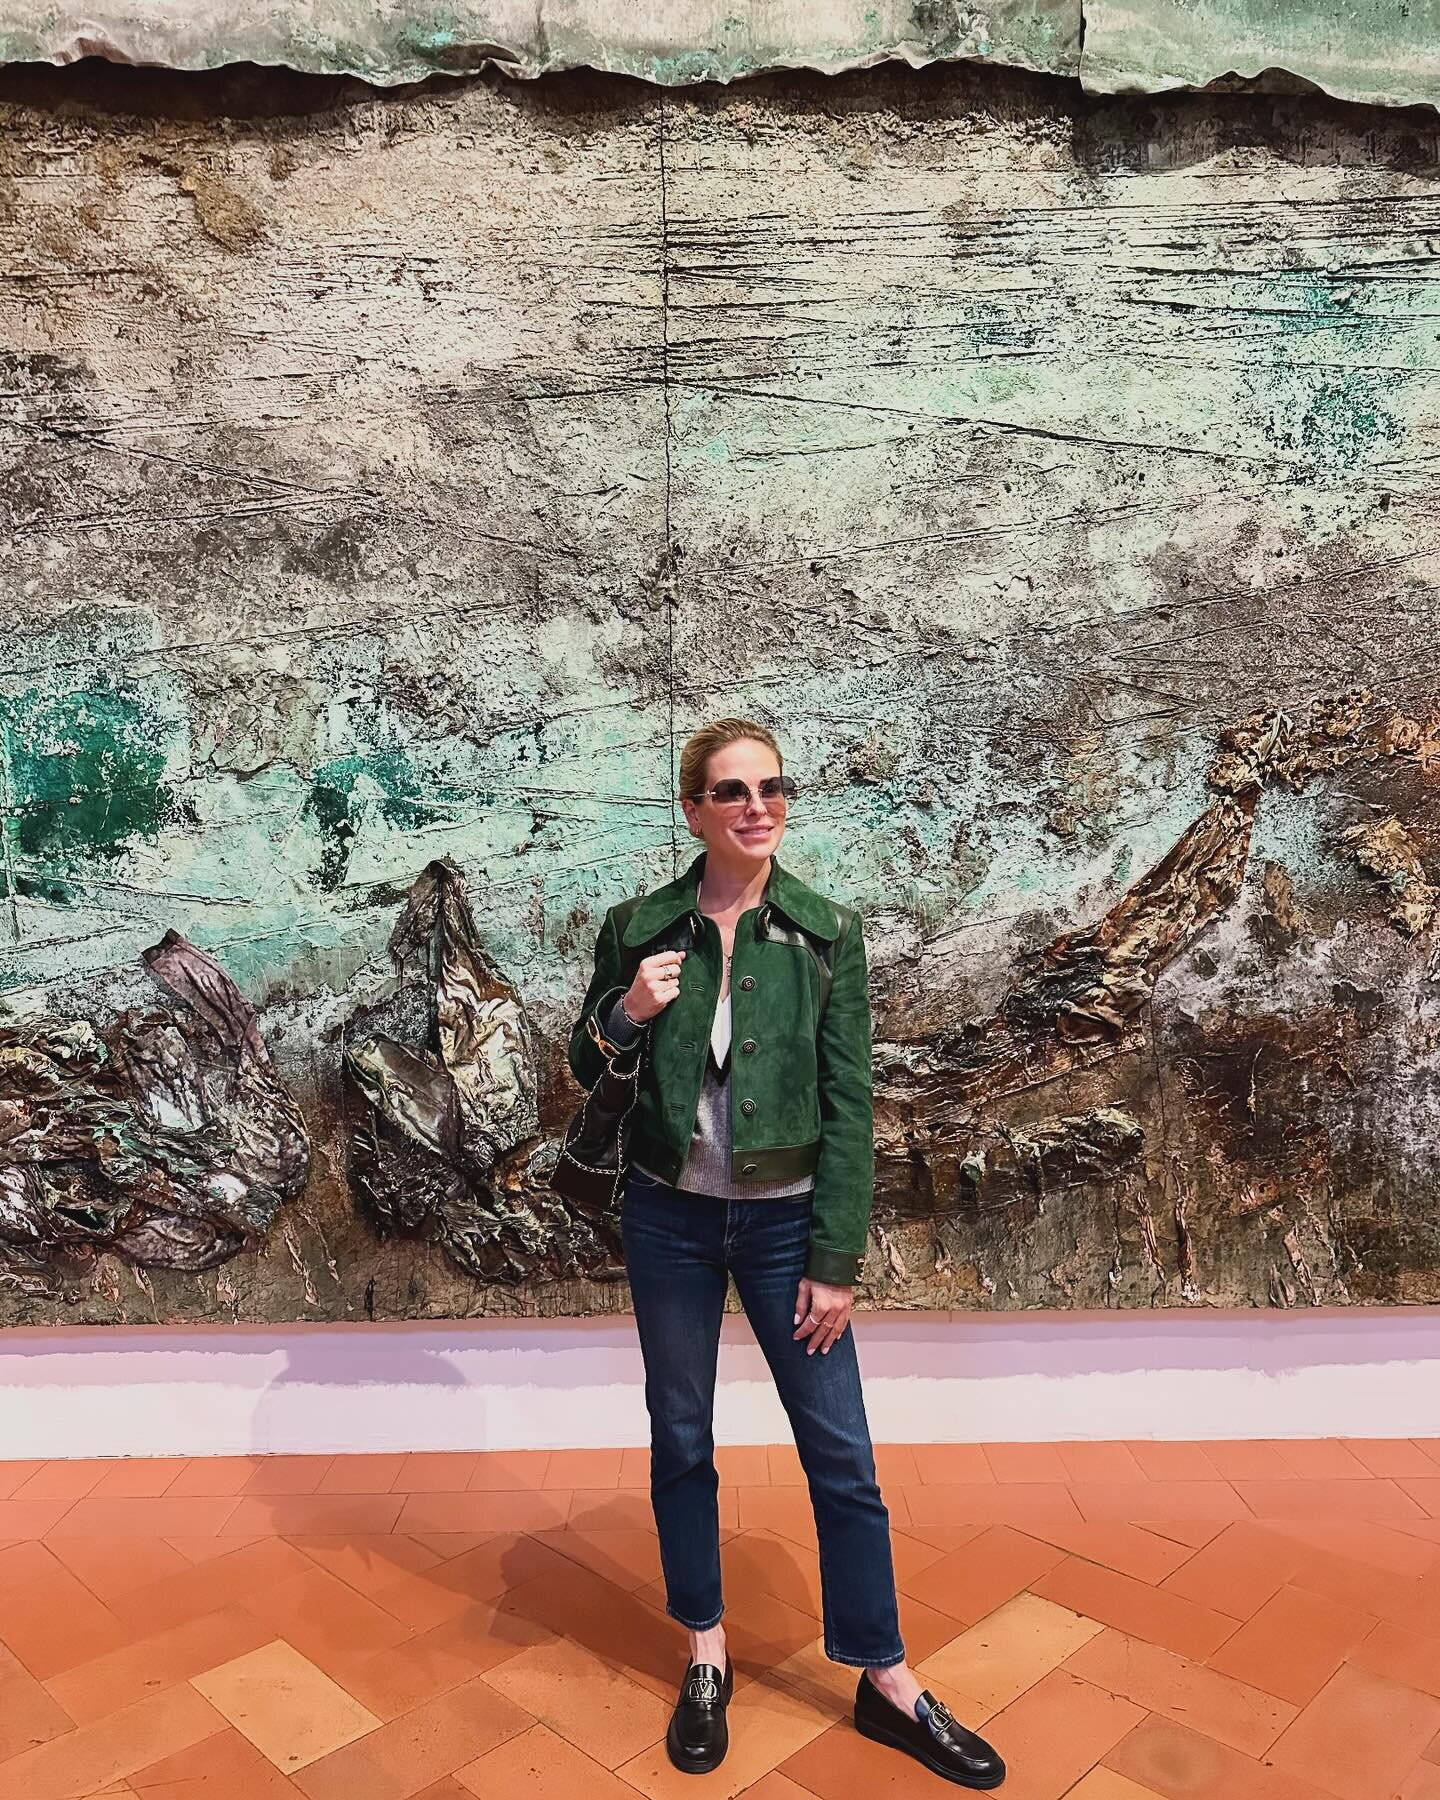 Back in Florence and had the pleasure of viewing the @anselm_kiefer exhibit at the magnificent @palazzostrozzi &mdash; absolutely incredible. A must visit. Enjoyed every second witnessing his monumental masterpieces. 👏🏼